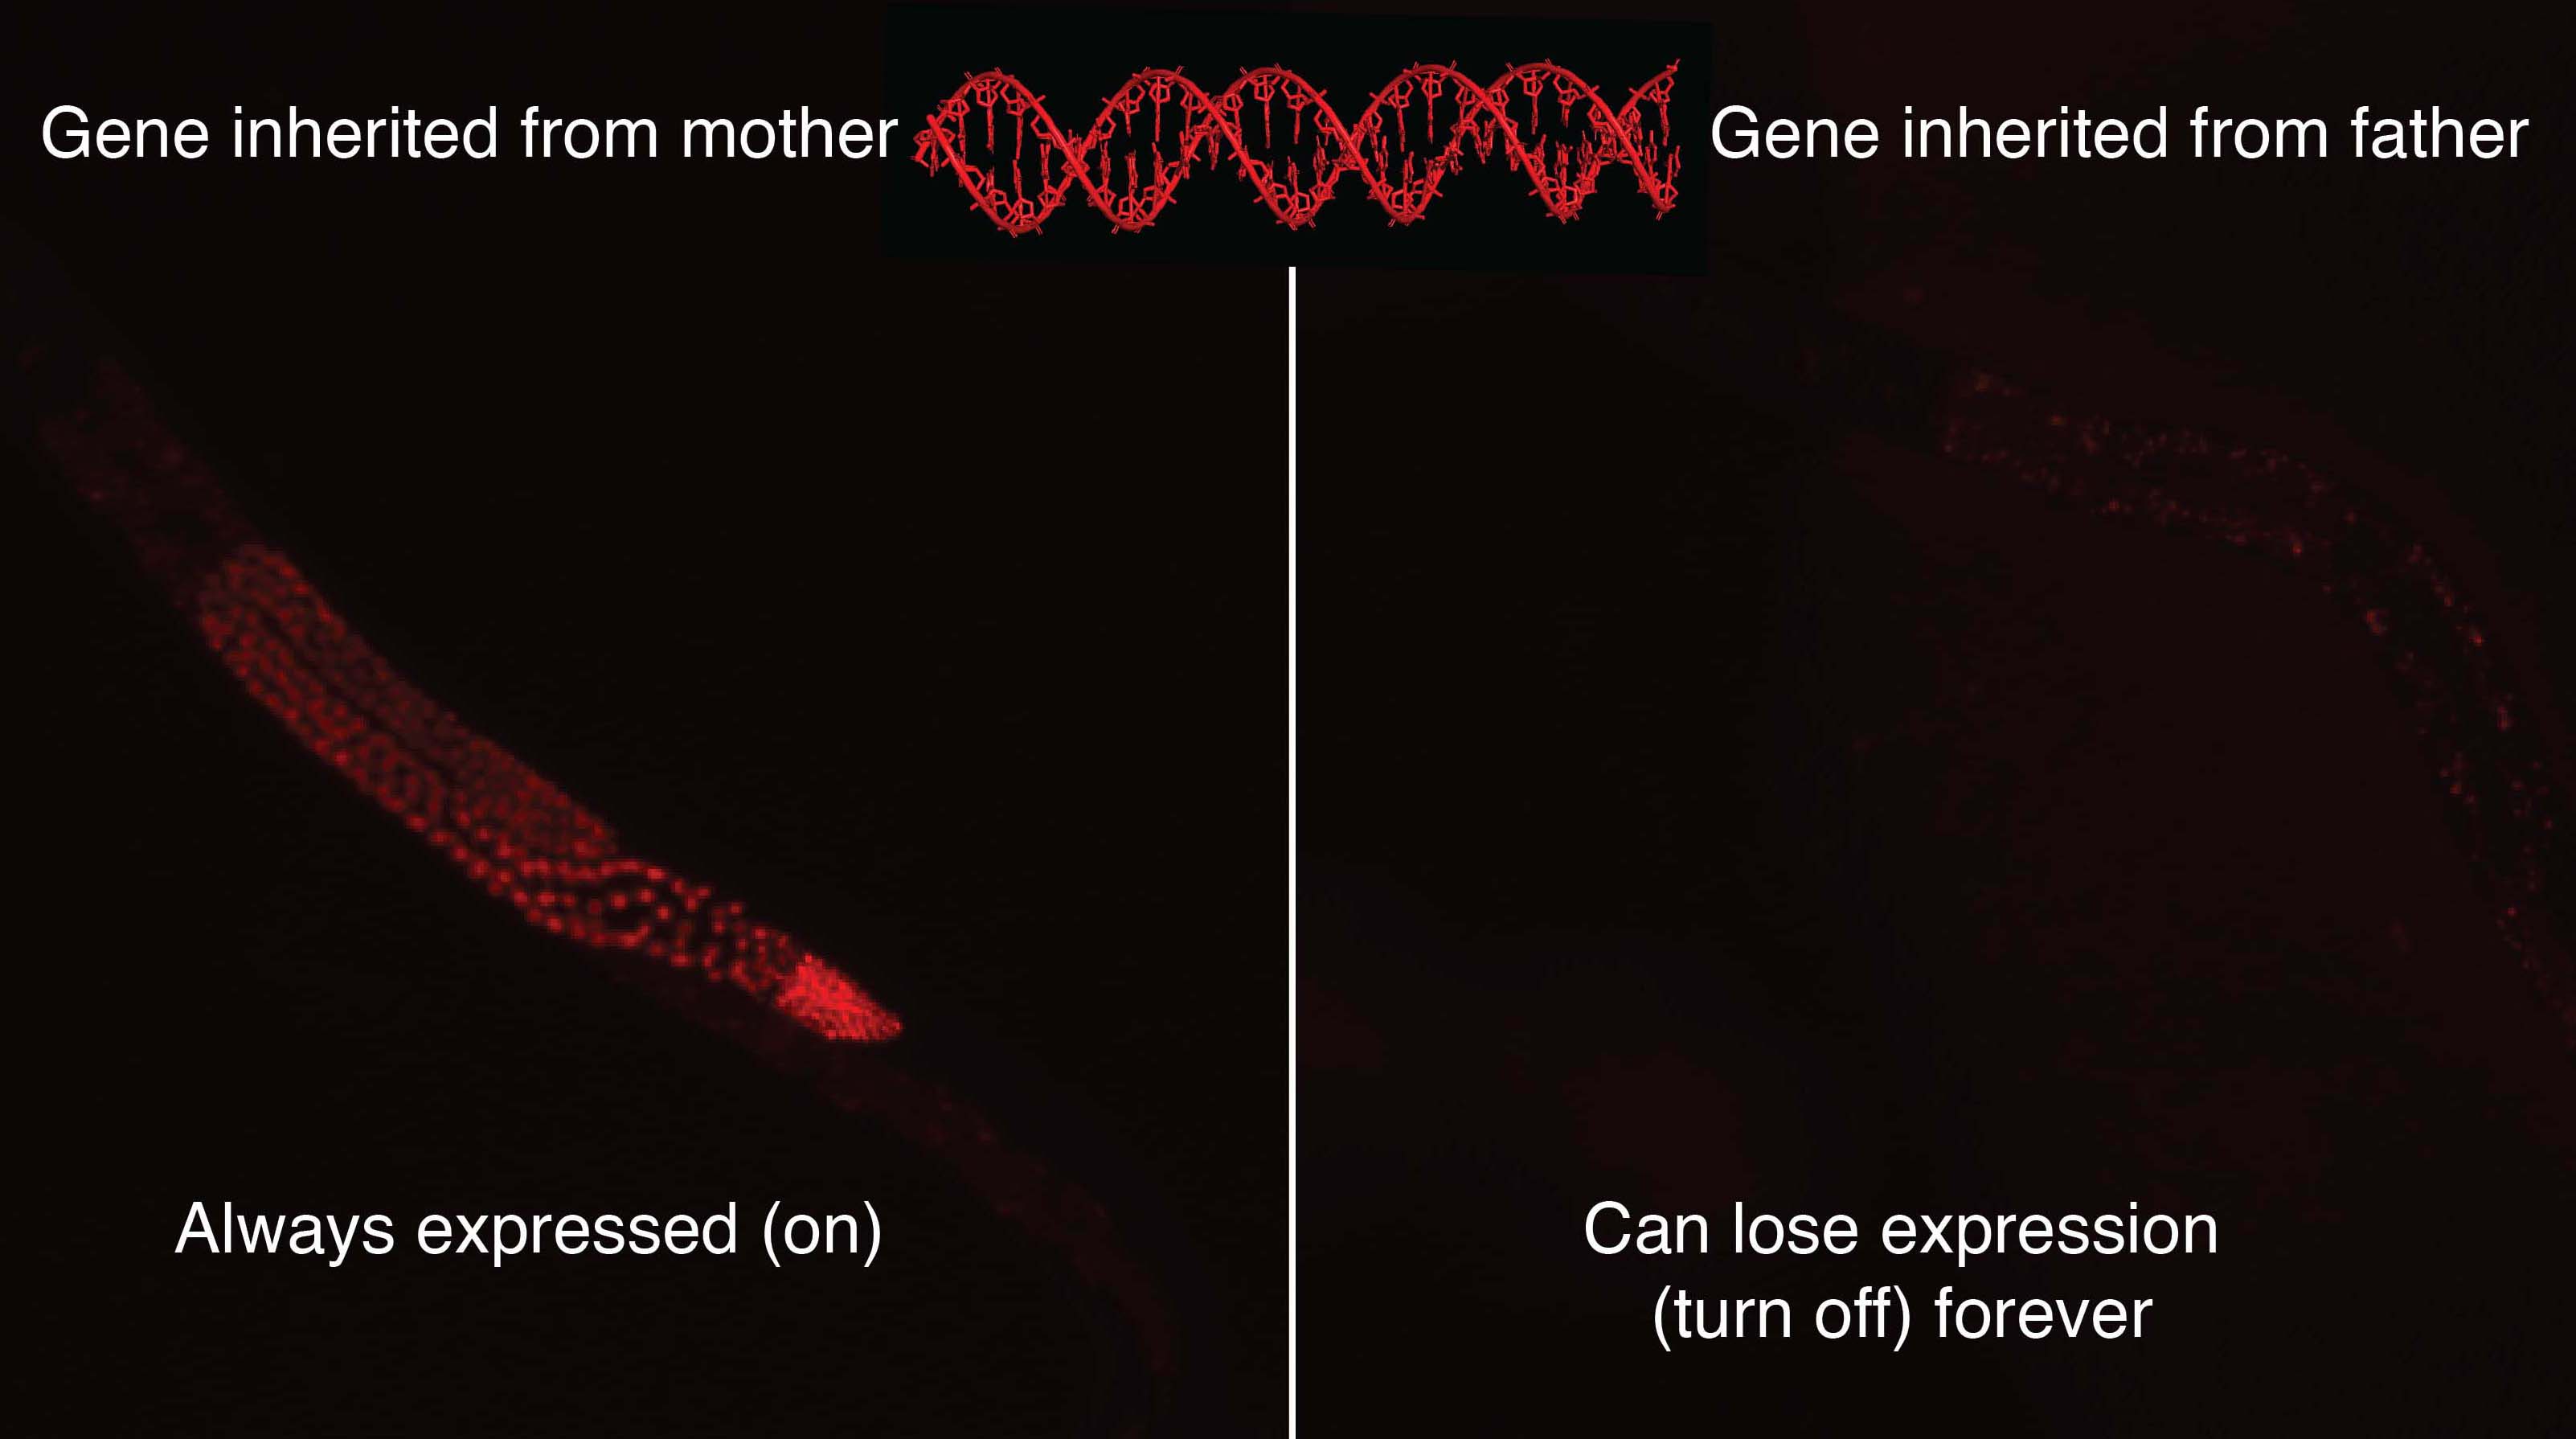 Researchers from UMD found that the same gene for expressing a red fluorescent protein is always expressed (ON), when it is inherited from the mother, but when inherited from the father can lose expression (turn OFF) forever if the mother lacks the gene. (Credit: Antony Jose) Click image to download hi-res version.